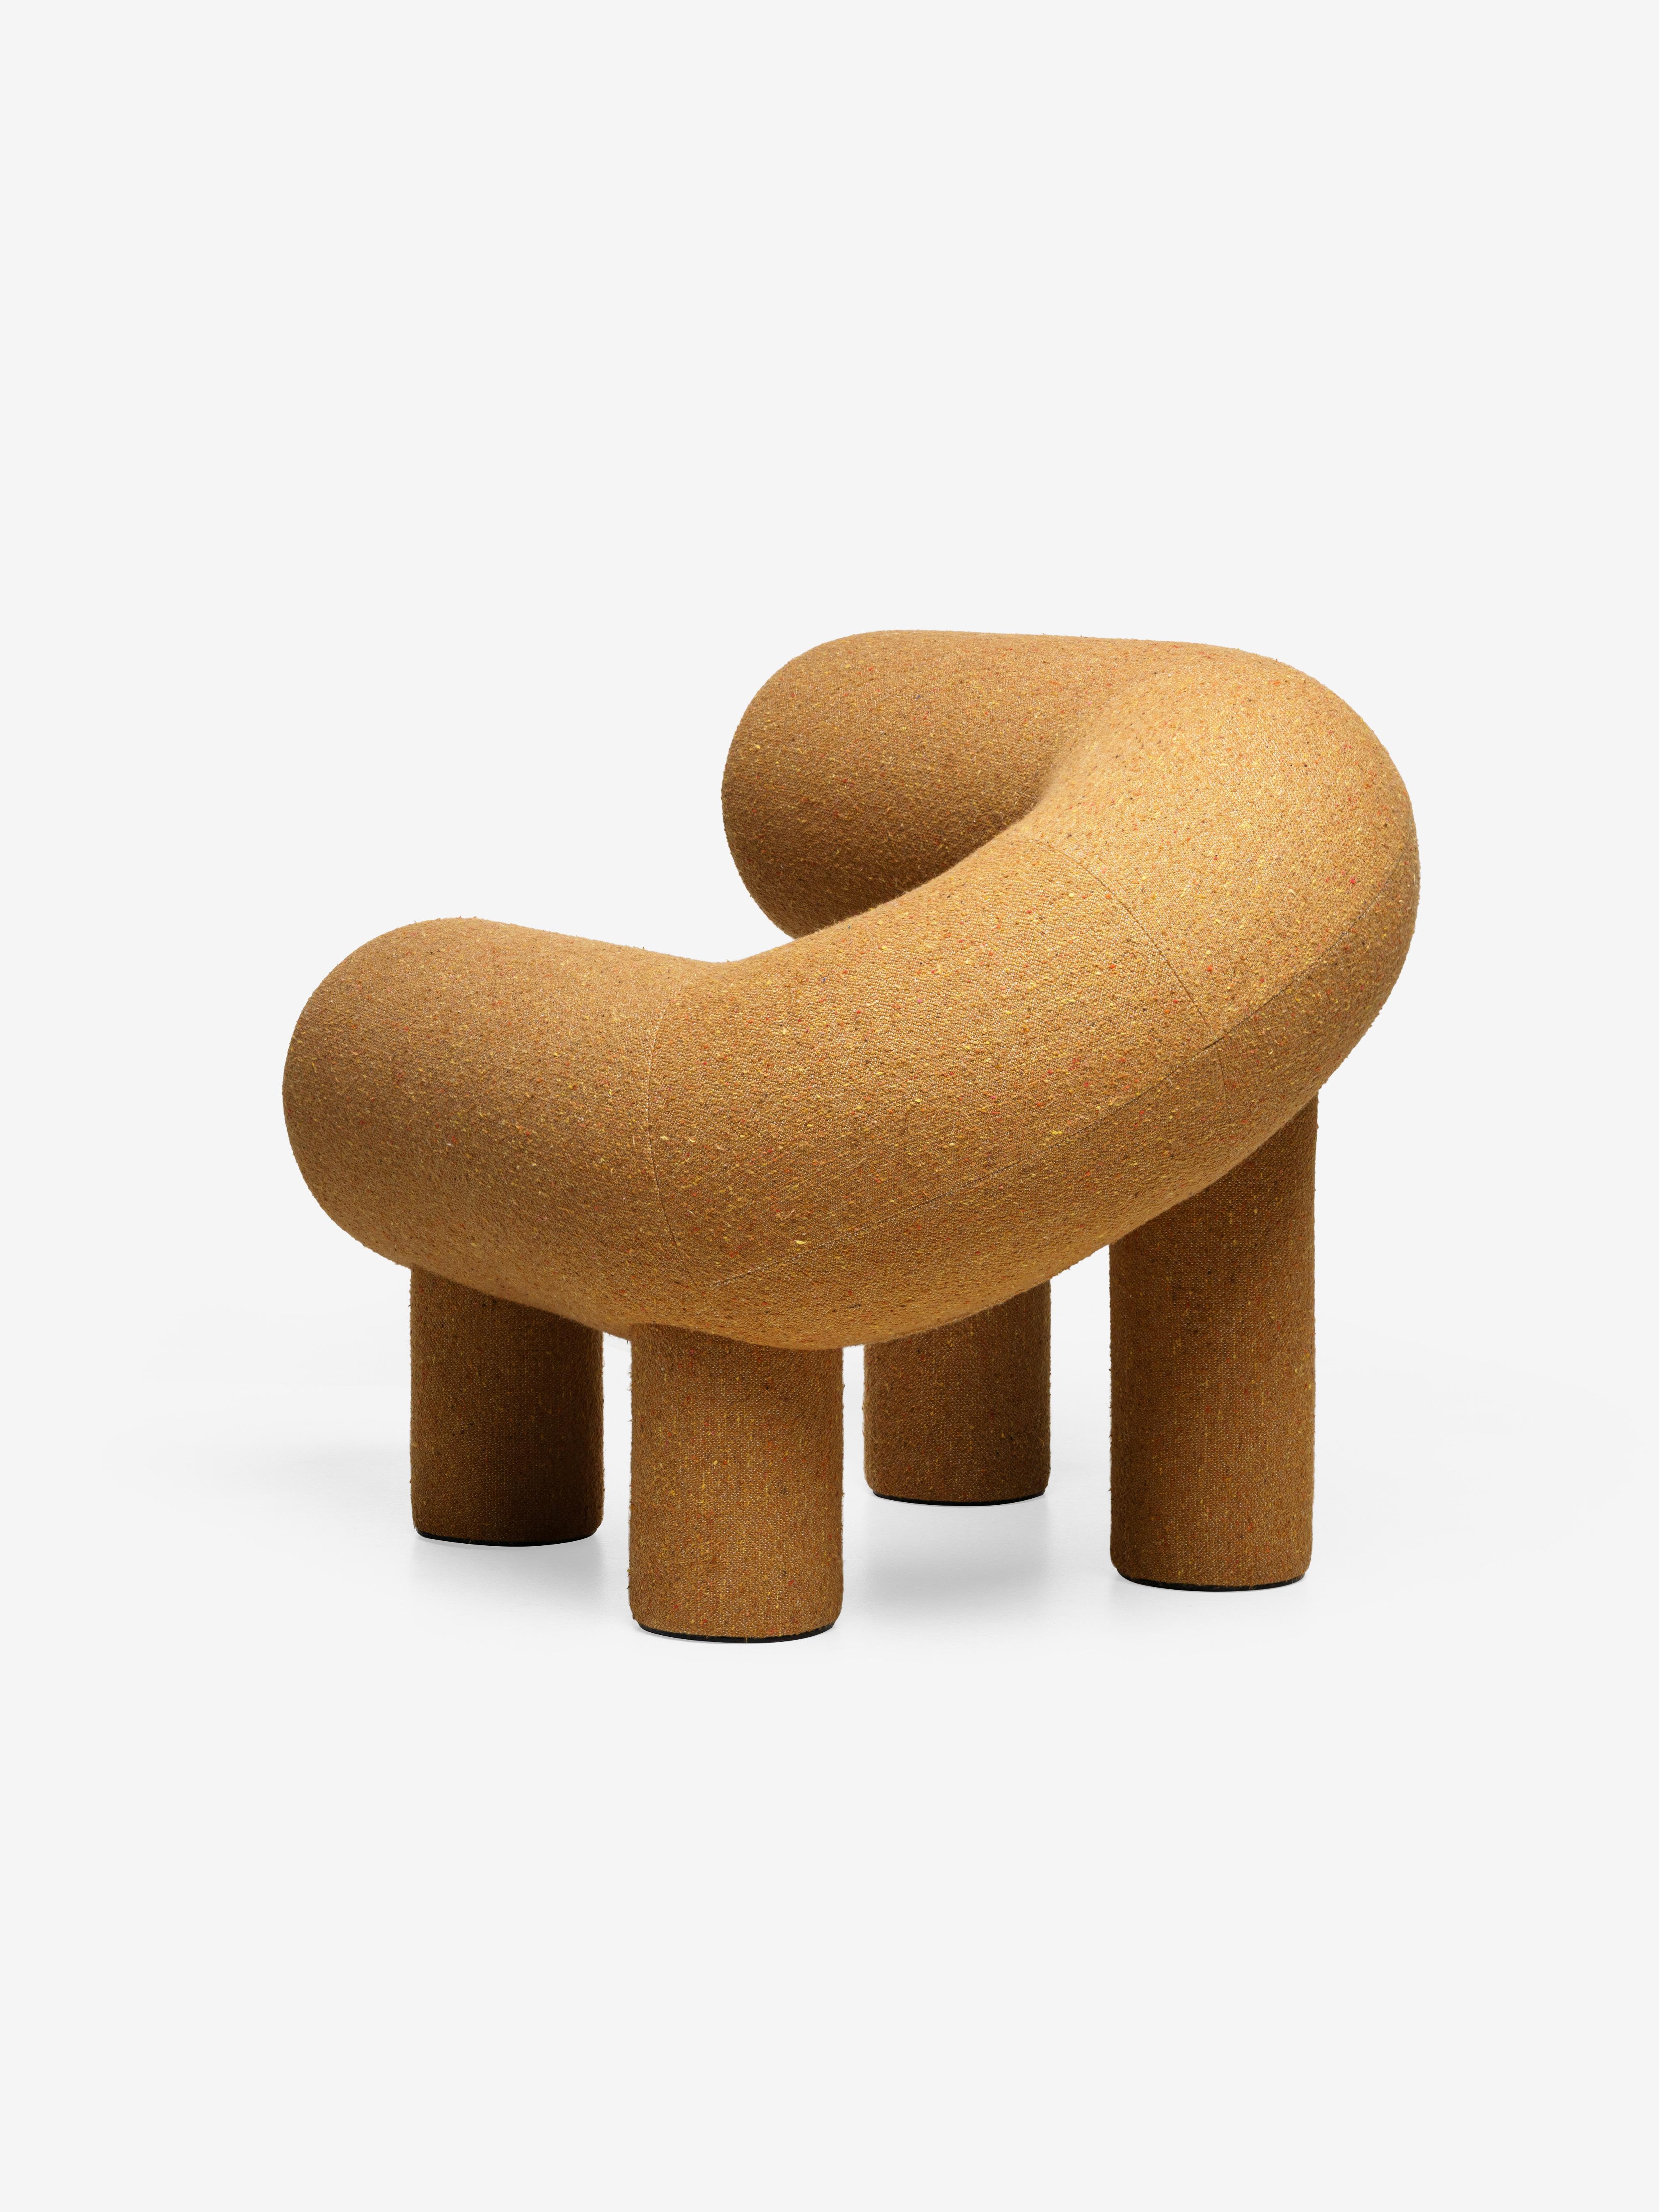 Designer Rostislav Sorokoviy aimed to create an object that resembles a soft sculpture rather than a piece of furniture. 
The seat and back of the armchair consist of two cylinders joined in a horseshoe shape. The legs are also cylindrical, and the